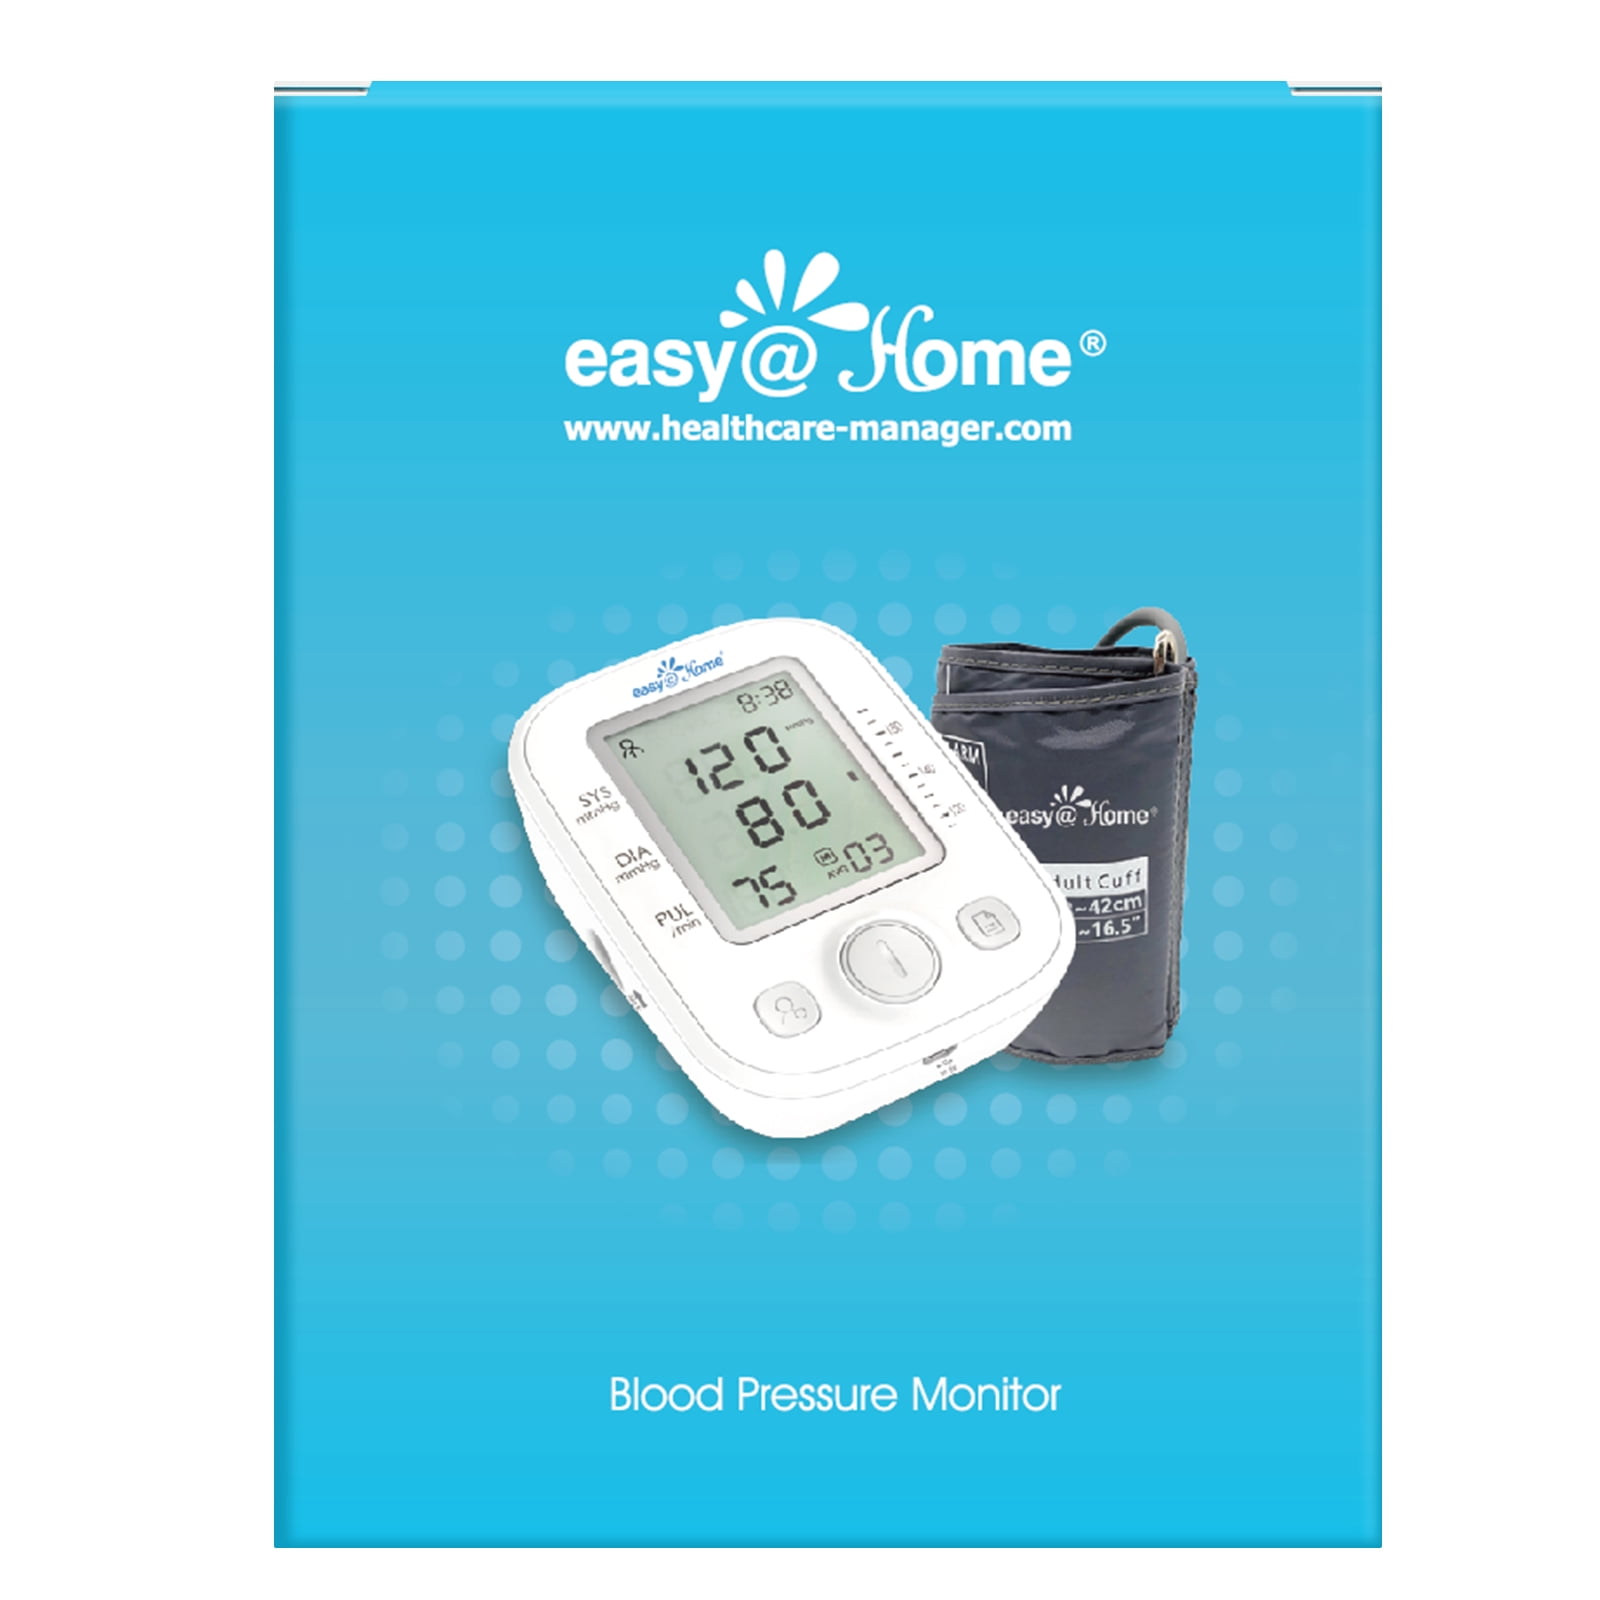 4 simple steps to choosing the best at-home blood pressure monitor - CNET